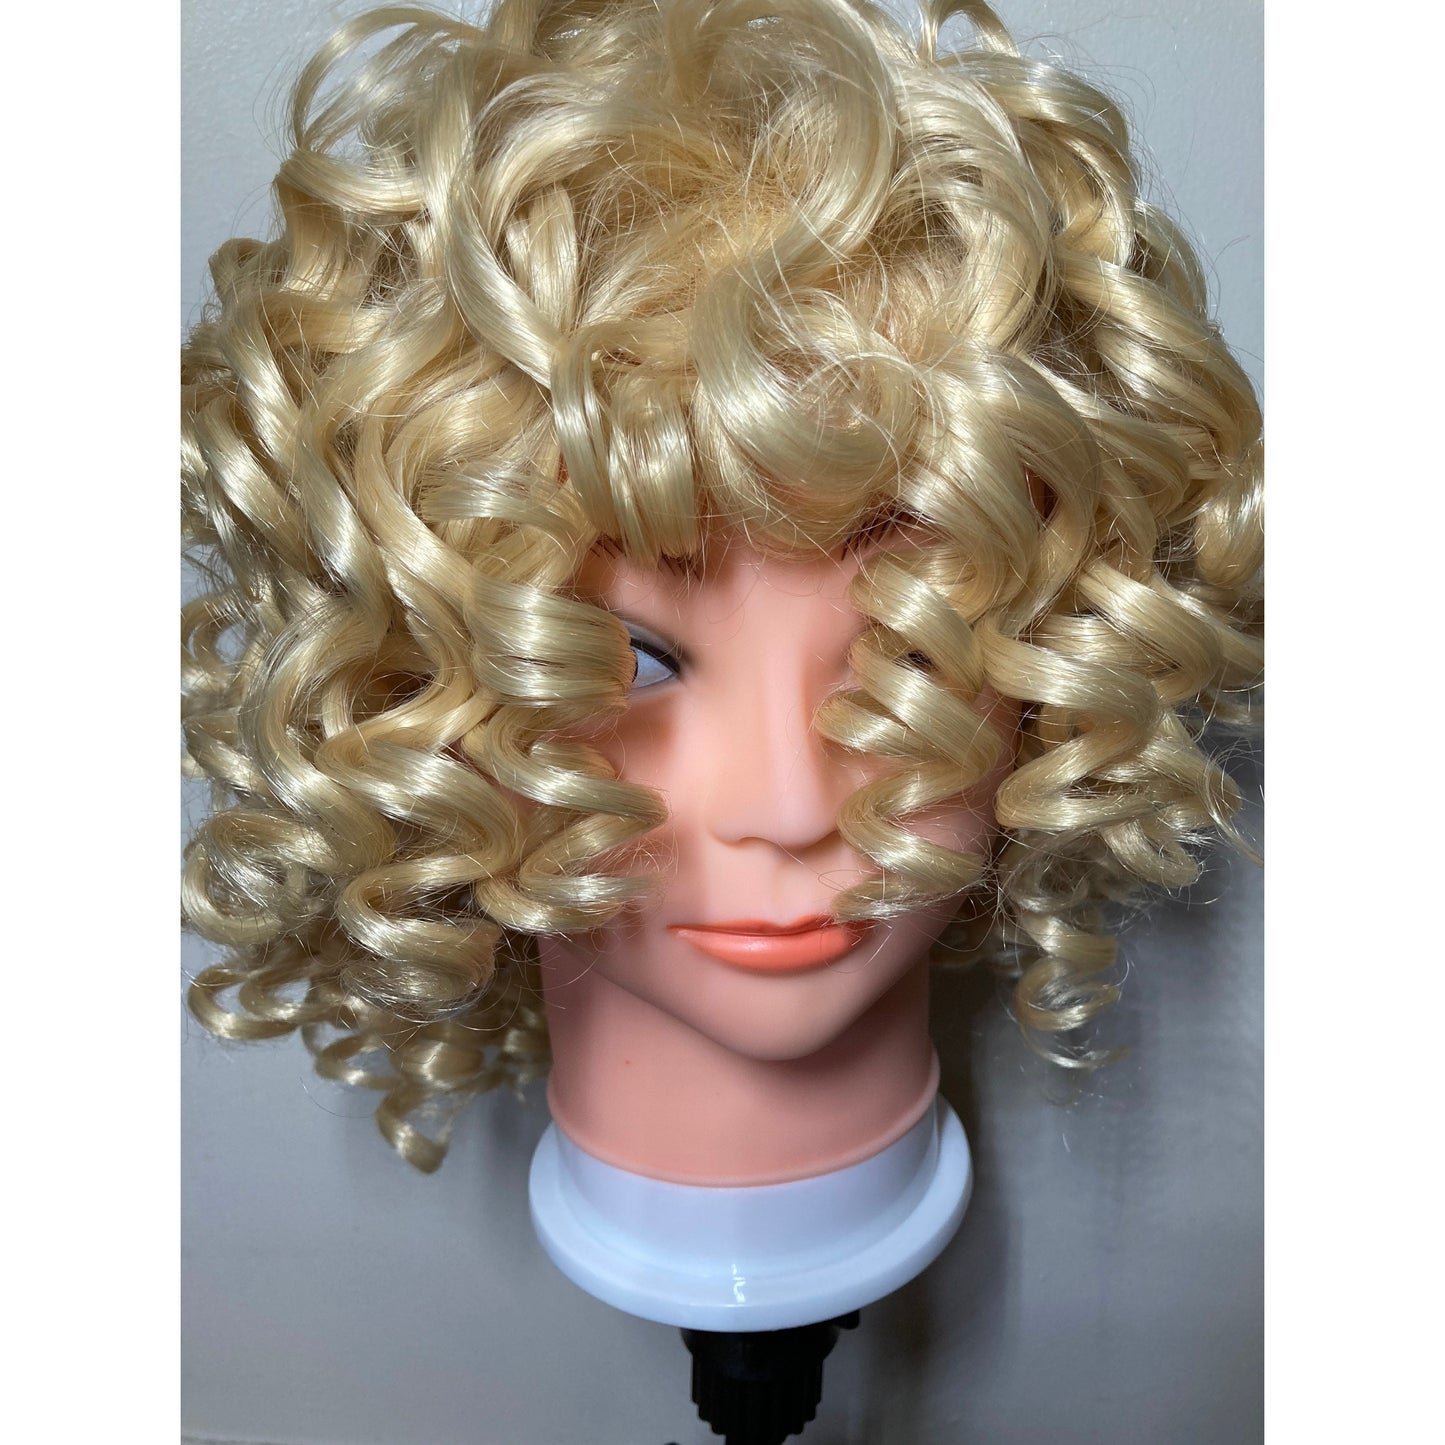 14inch AFRO Blonde Big Curly Wigs